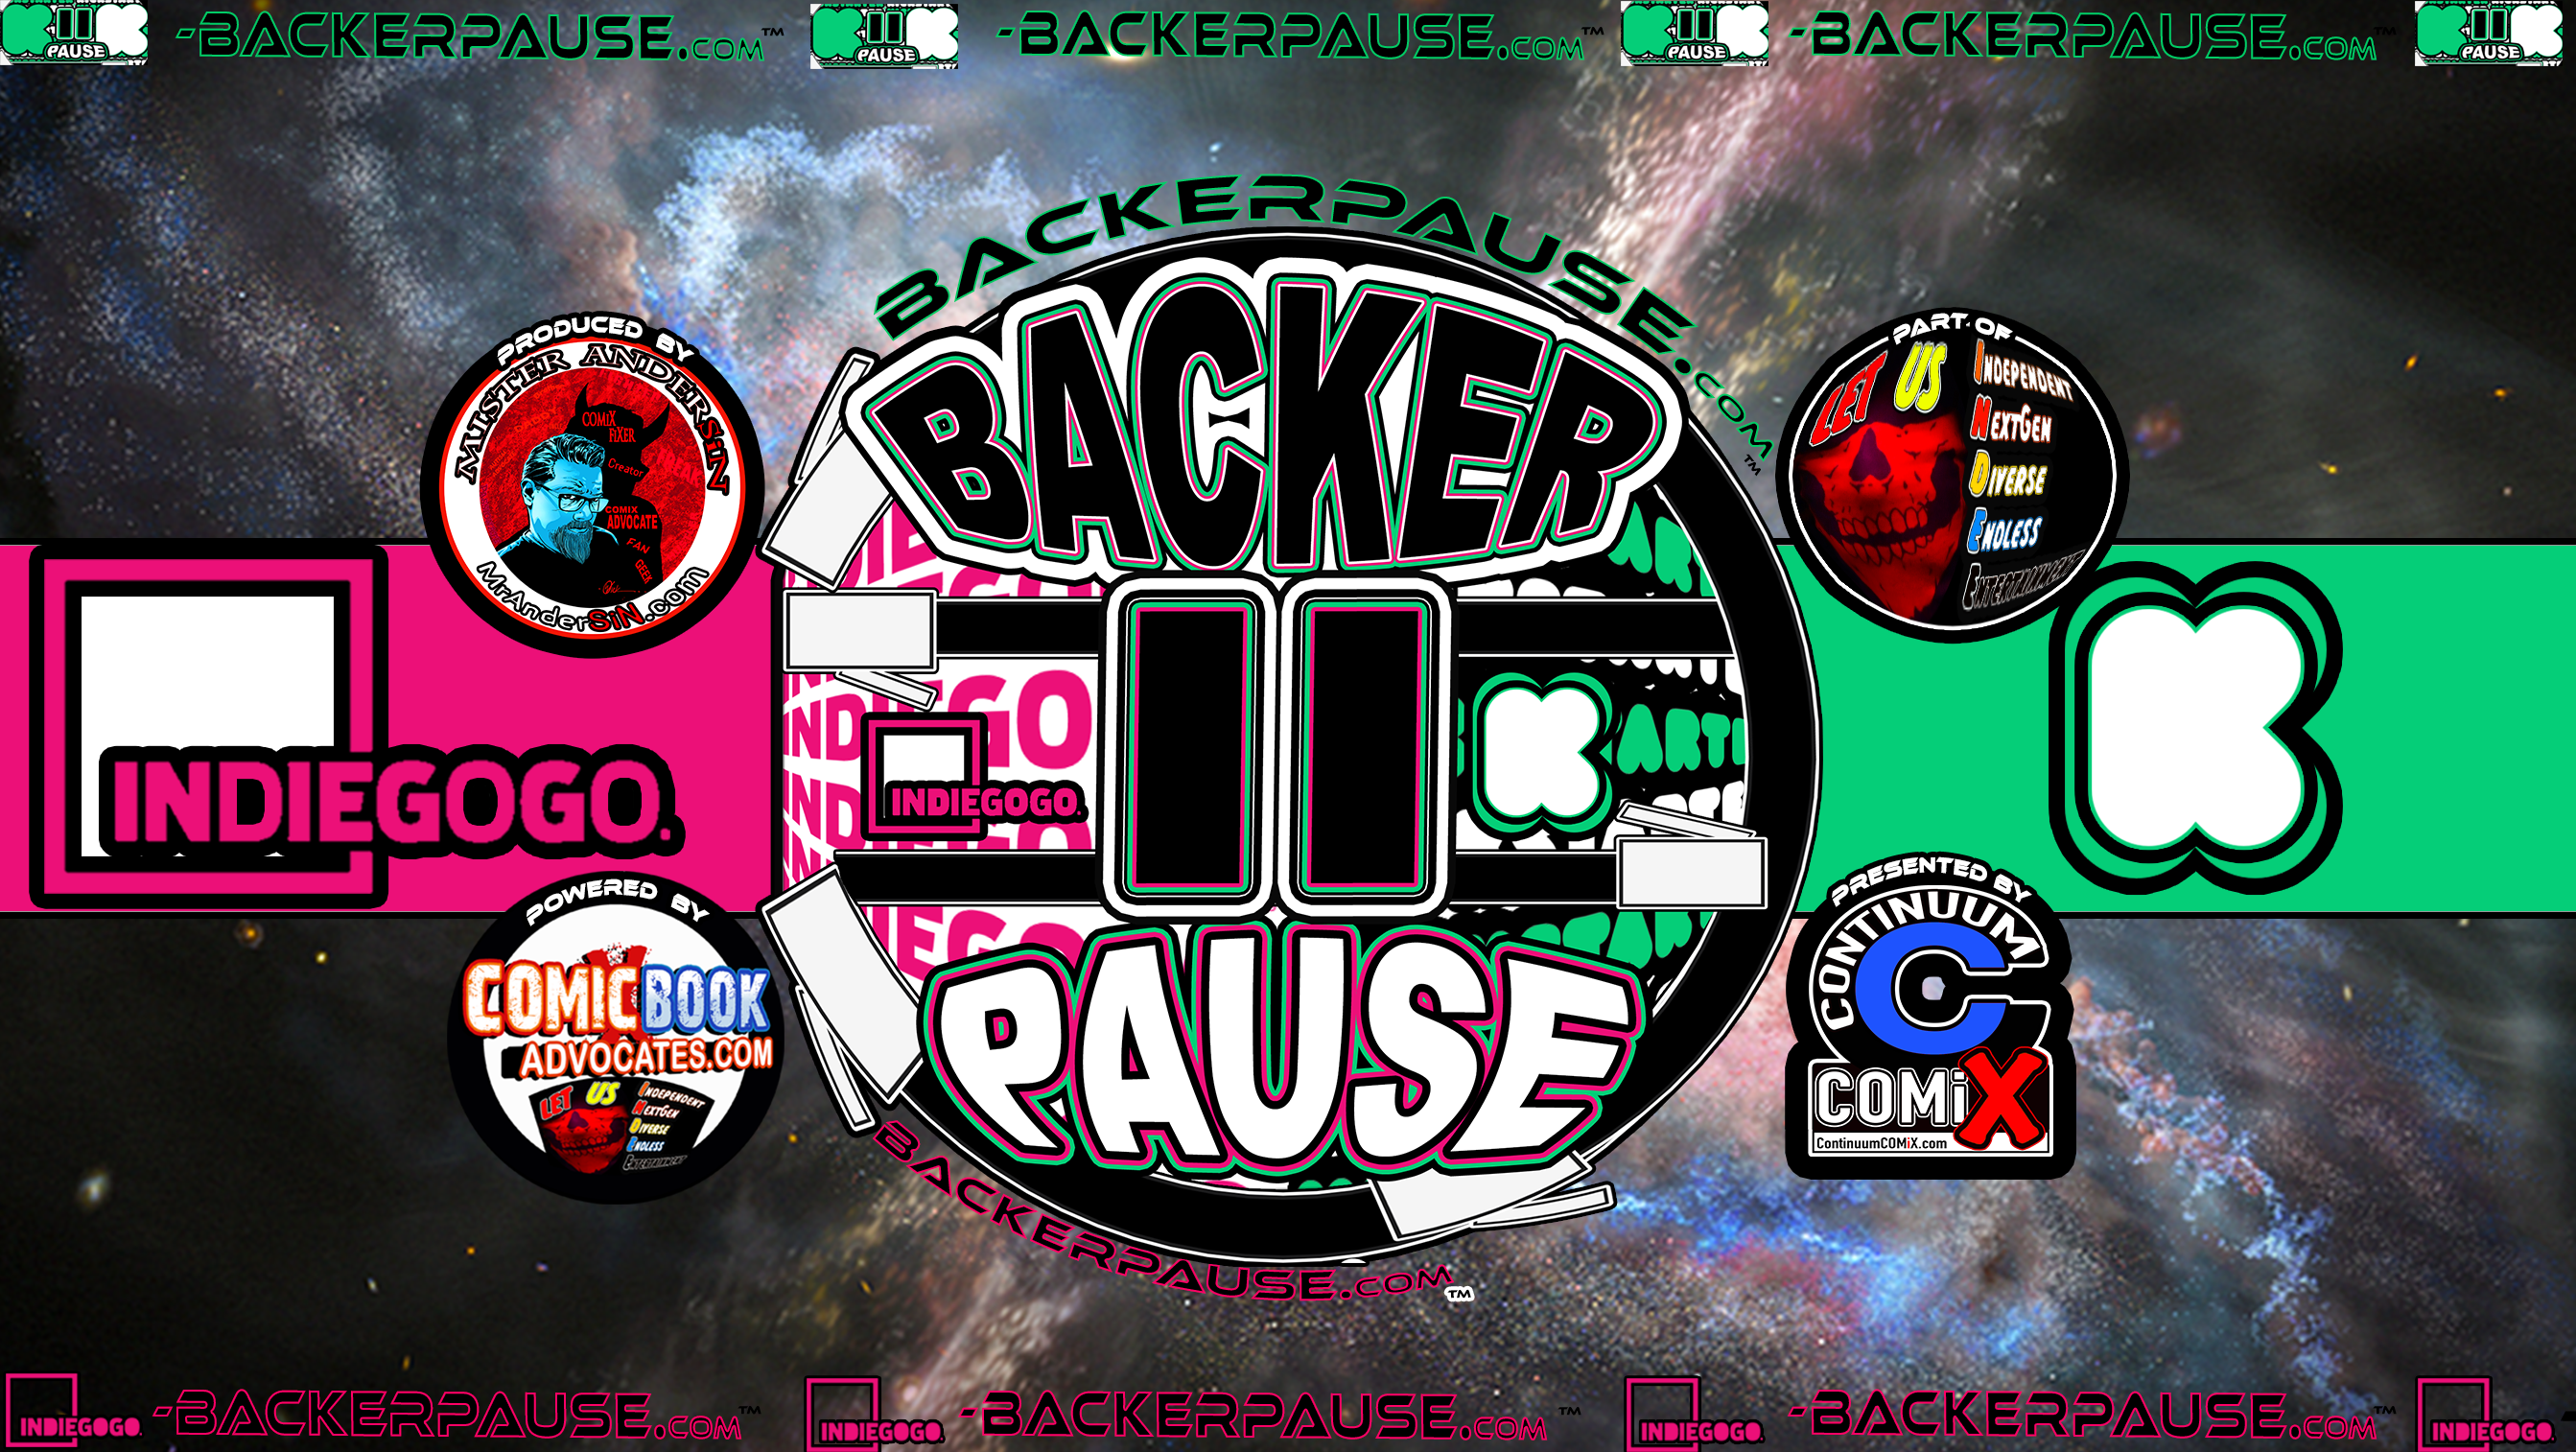 NOW CROWDFUNDING  this is BACKER PAUSE.com, HOME of Comic Book Crowdfunding ADVOCACY!!! –